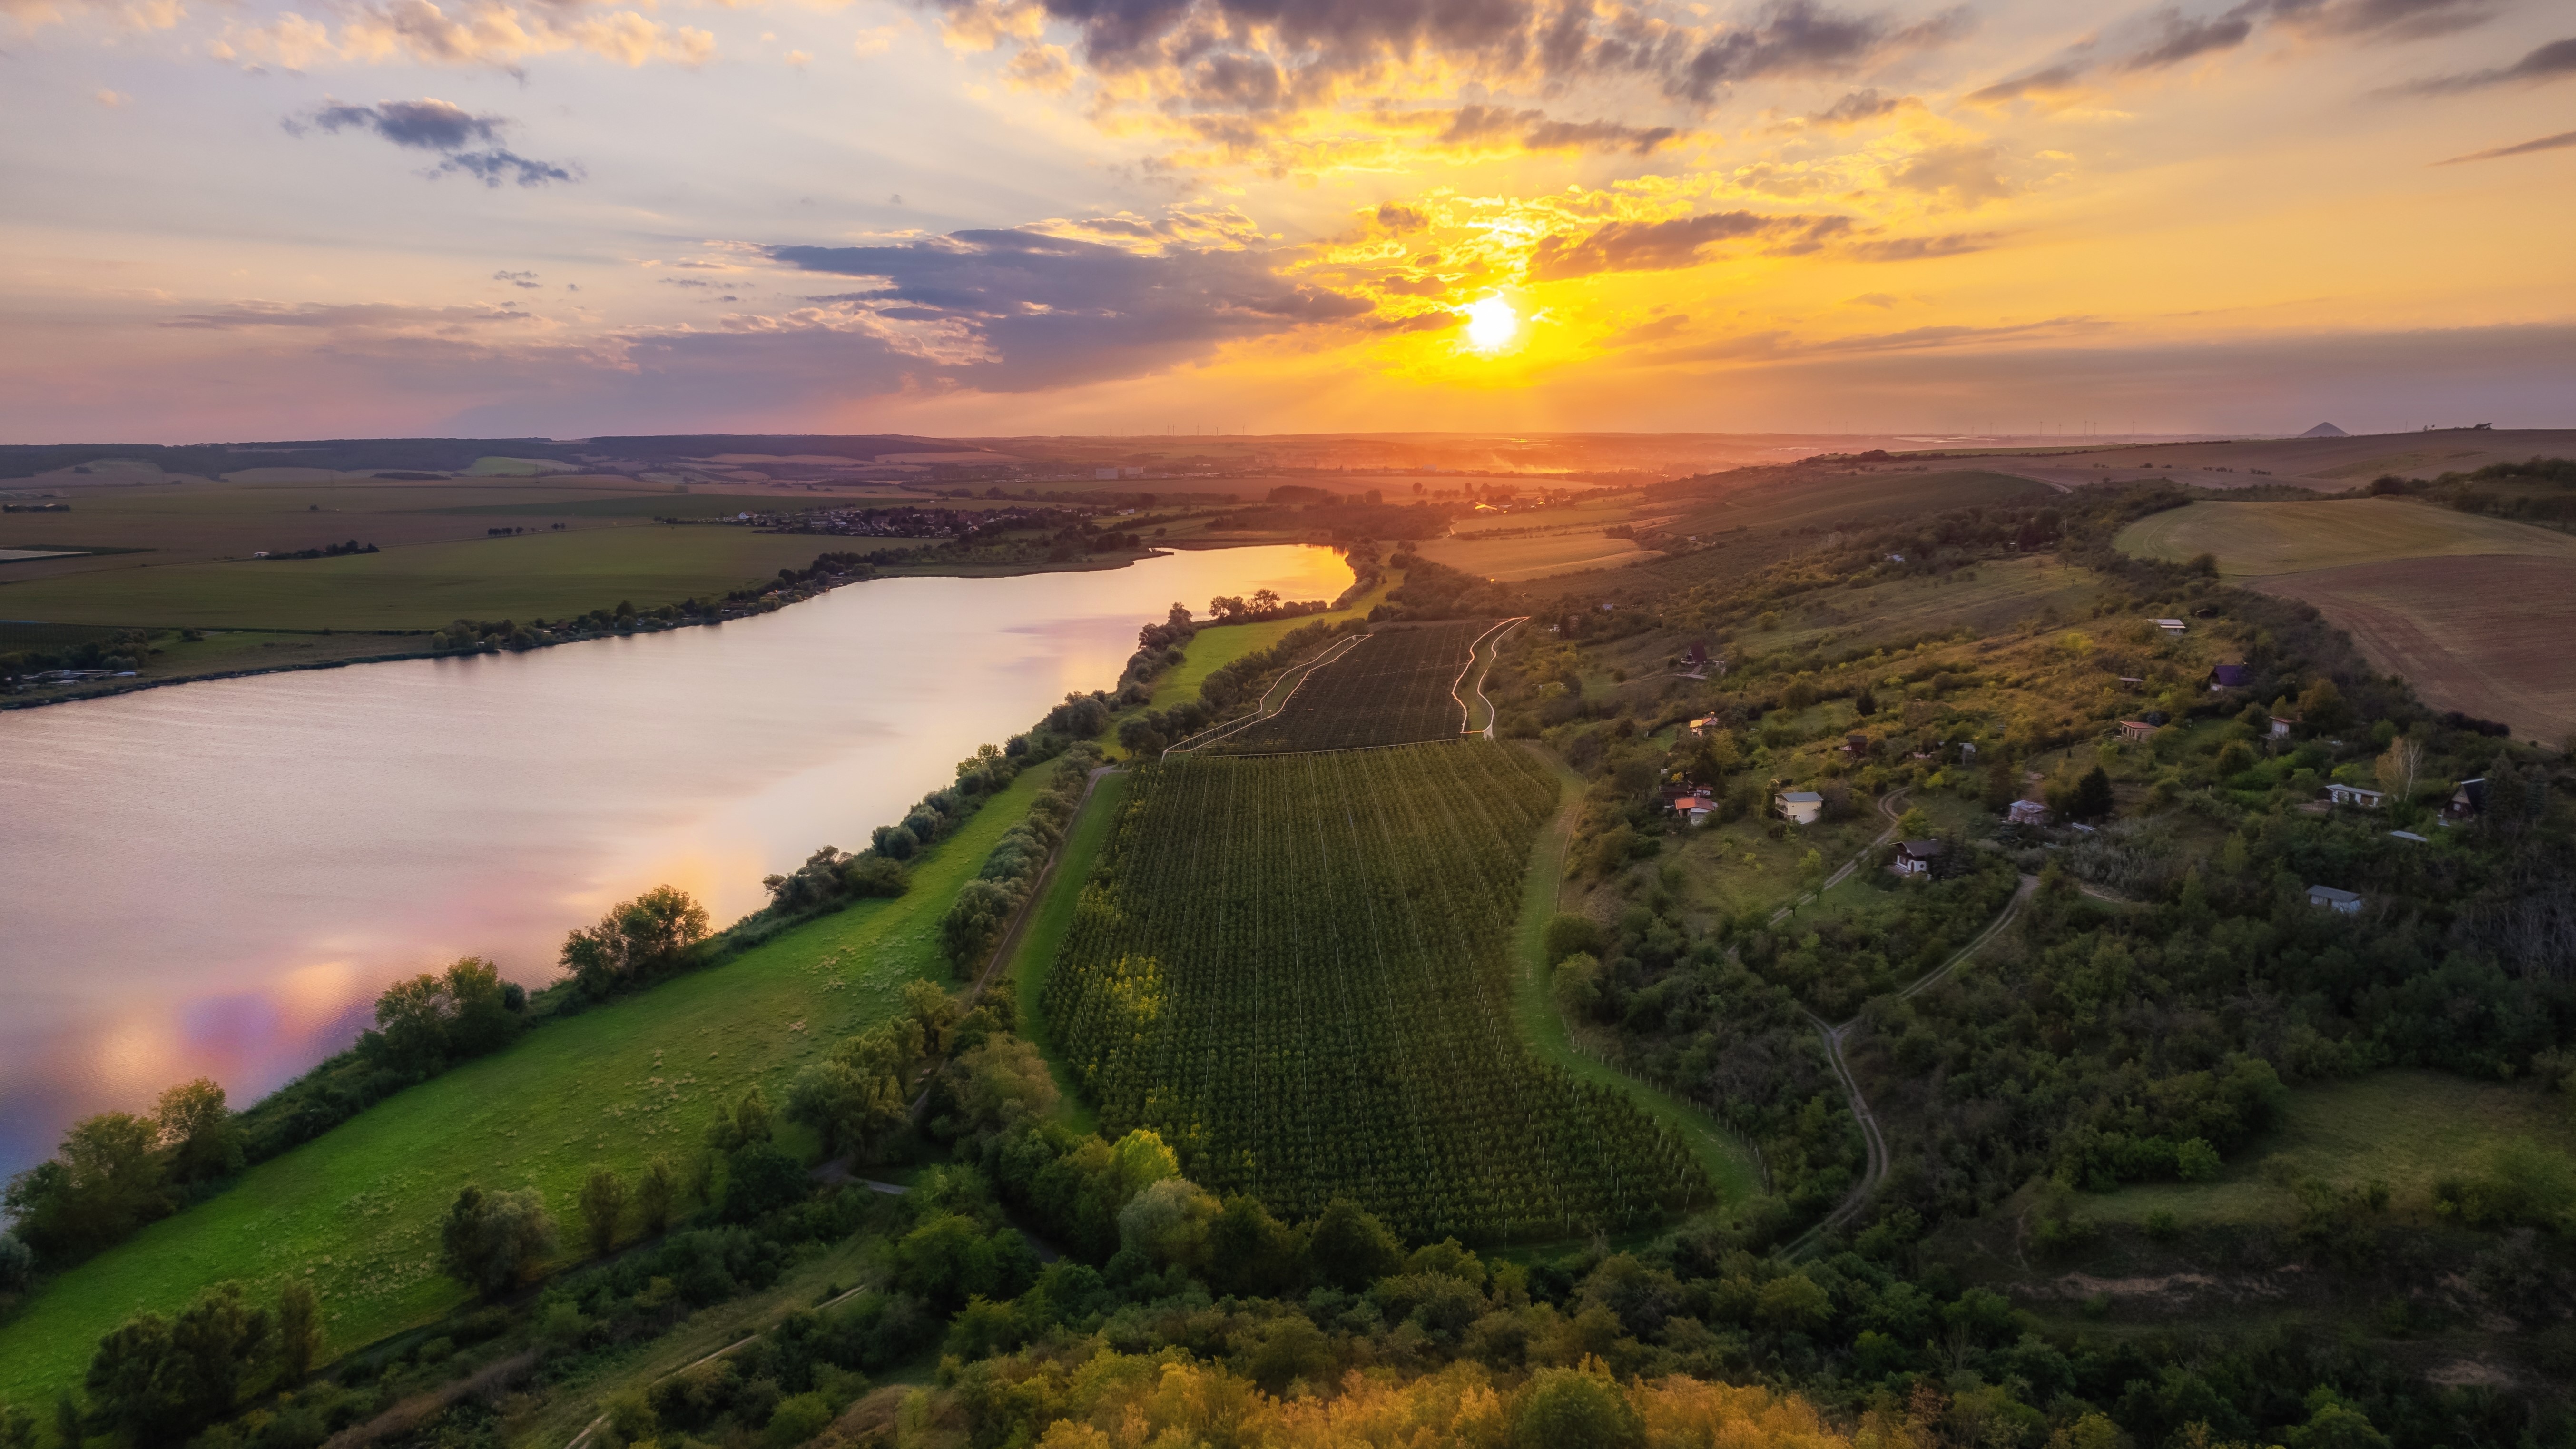 A view of Sweet Lake in Germany at sunset.